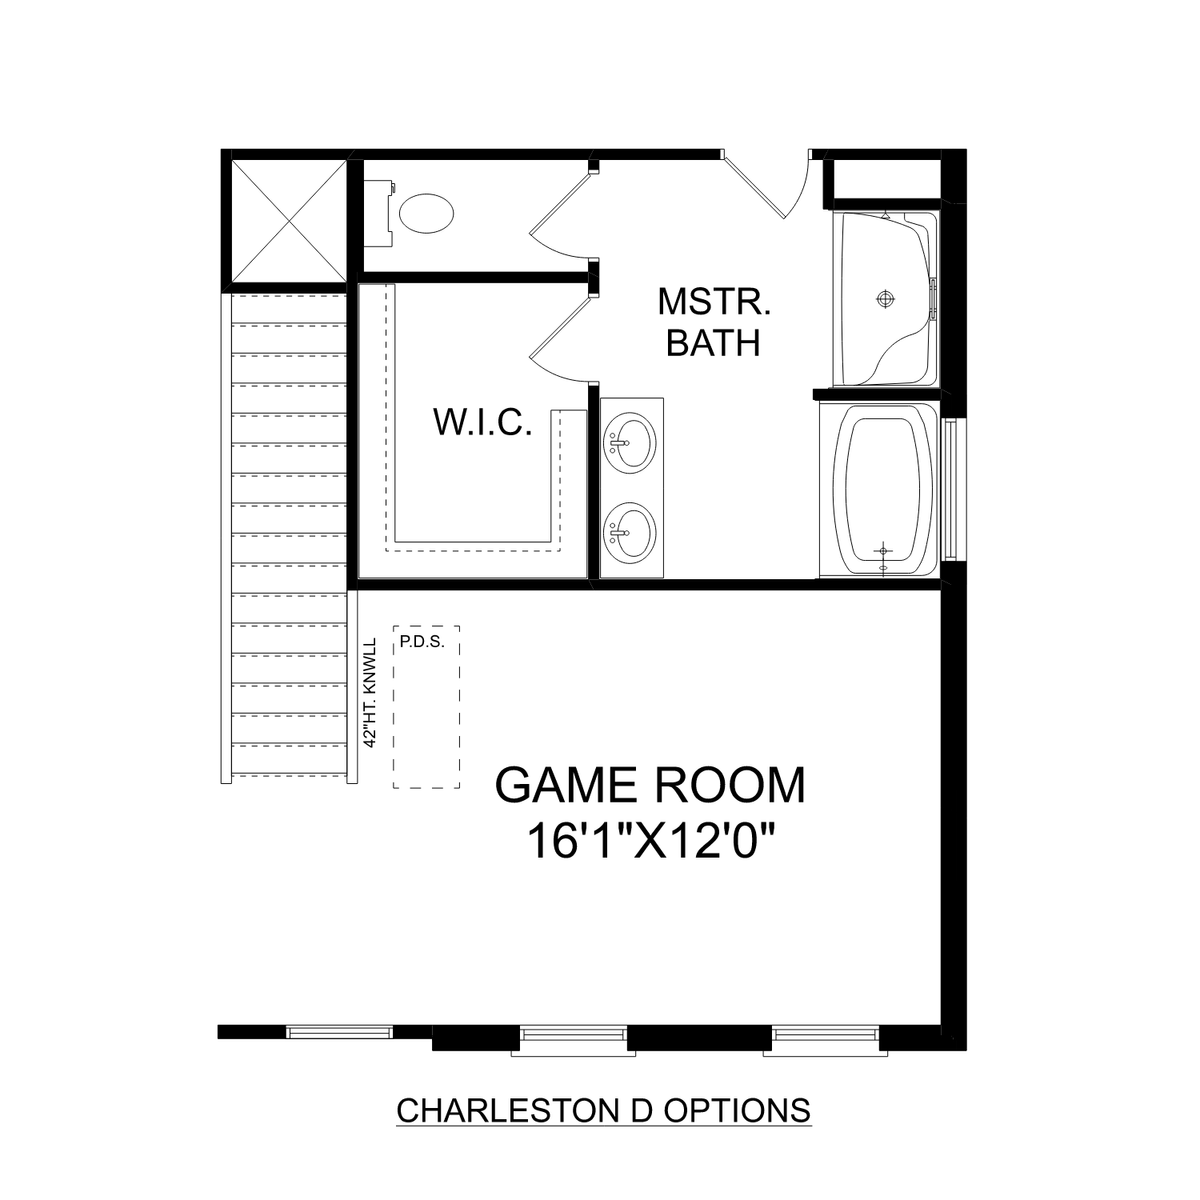 3 - The Charleston D buildable floor plan layout in Davidson Homes' Blue Spring community.